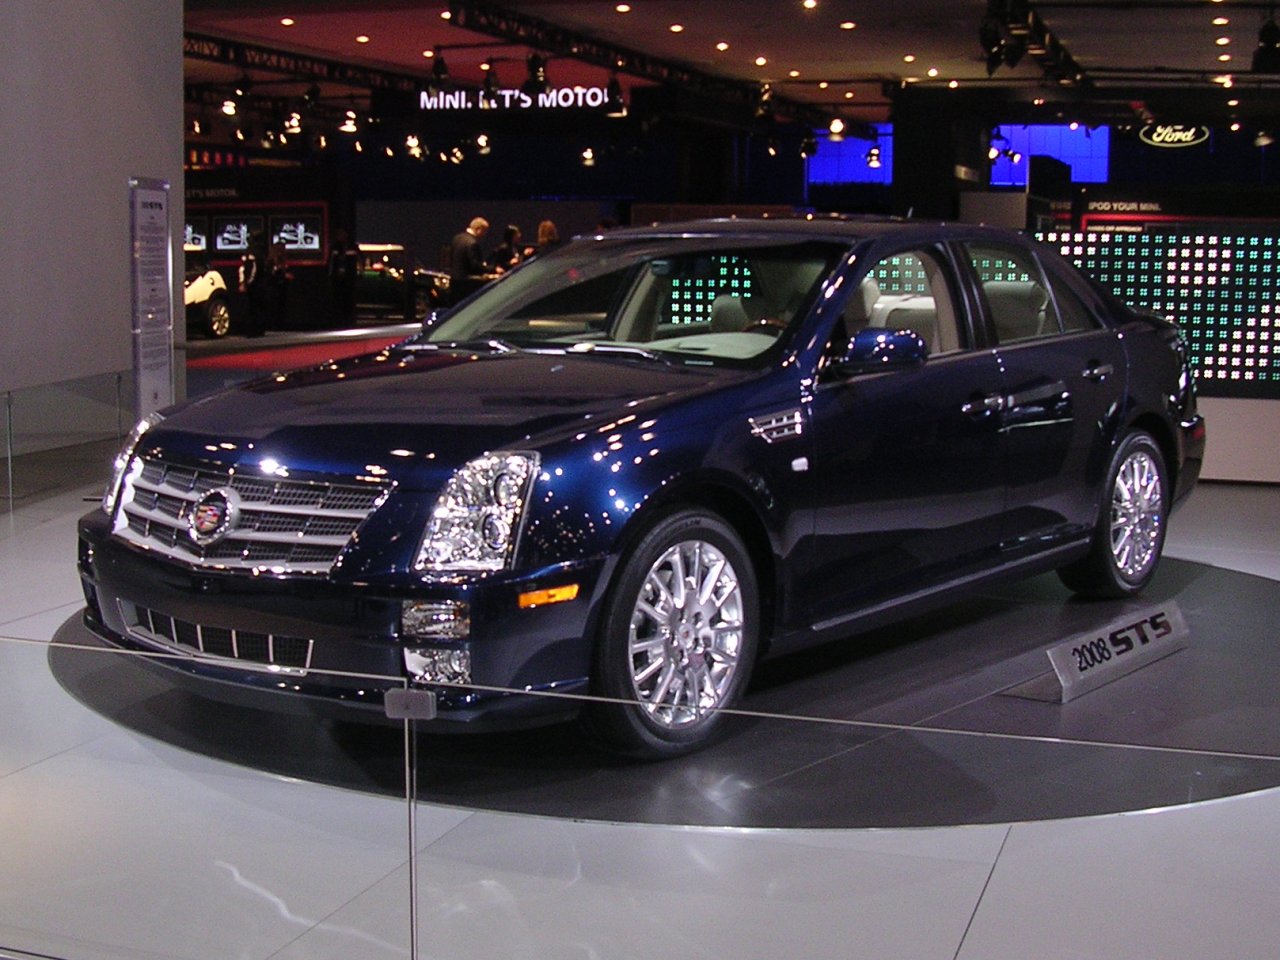 http://cadillaccar.files.wordpress.com/2009/07/cadillac-sts-pictures.jpg